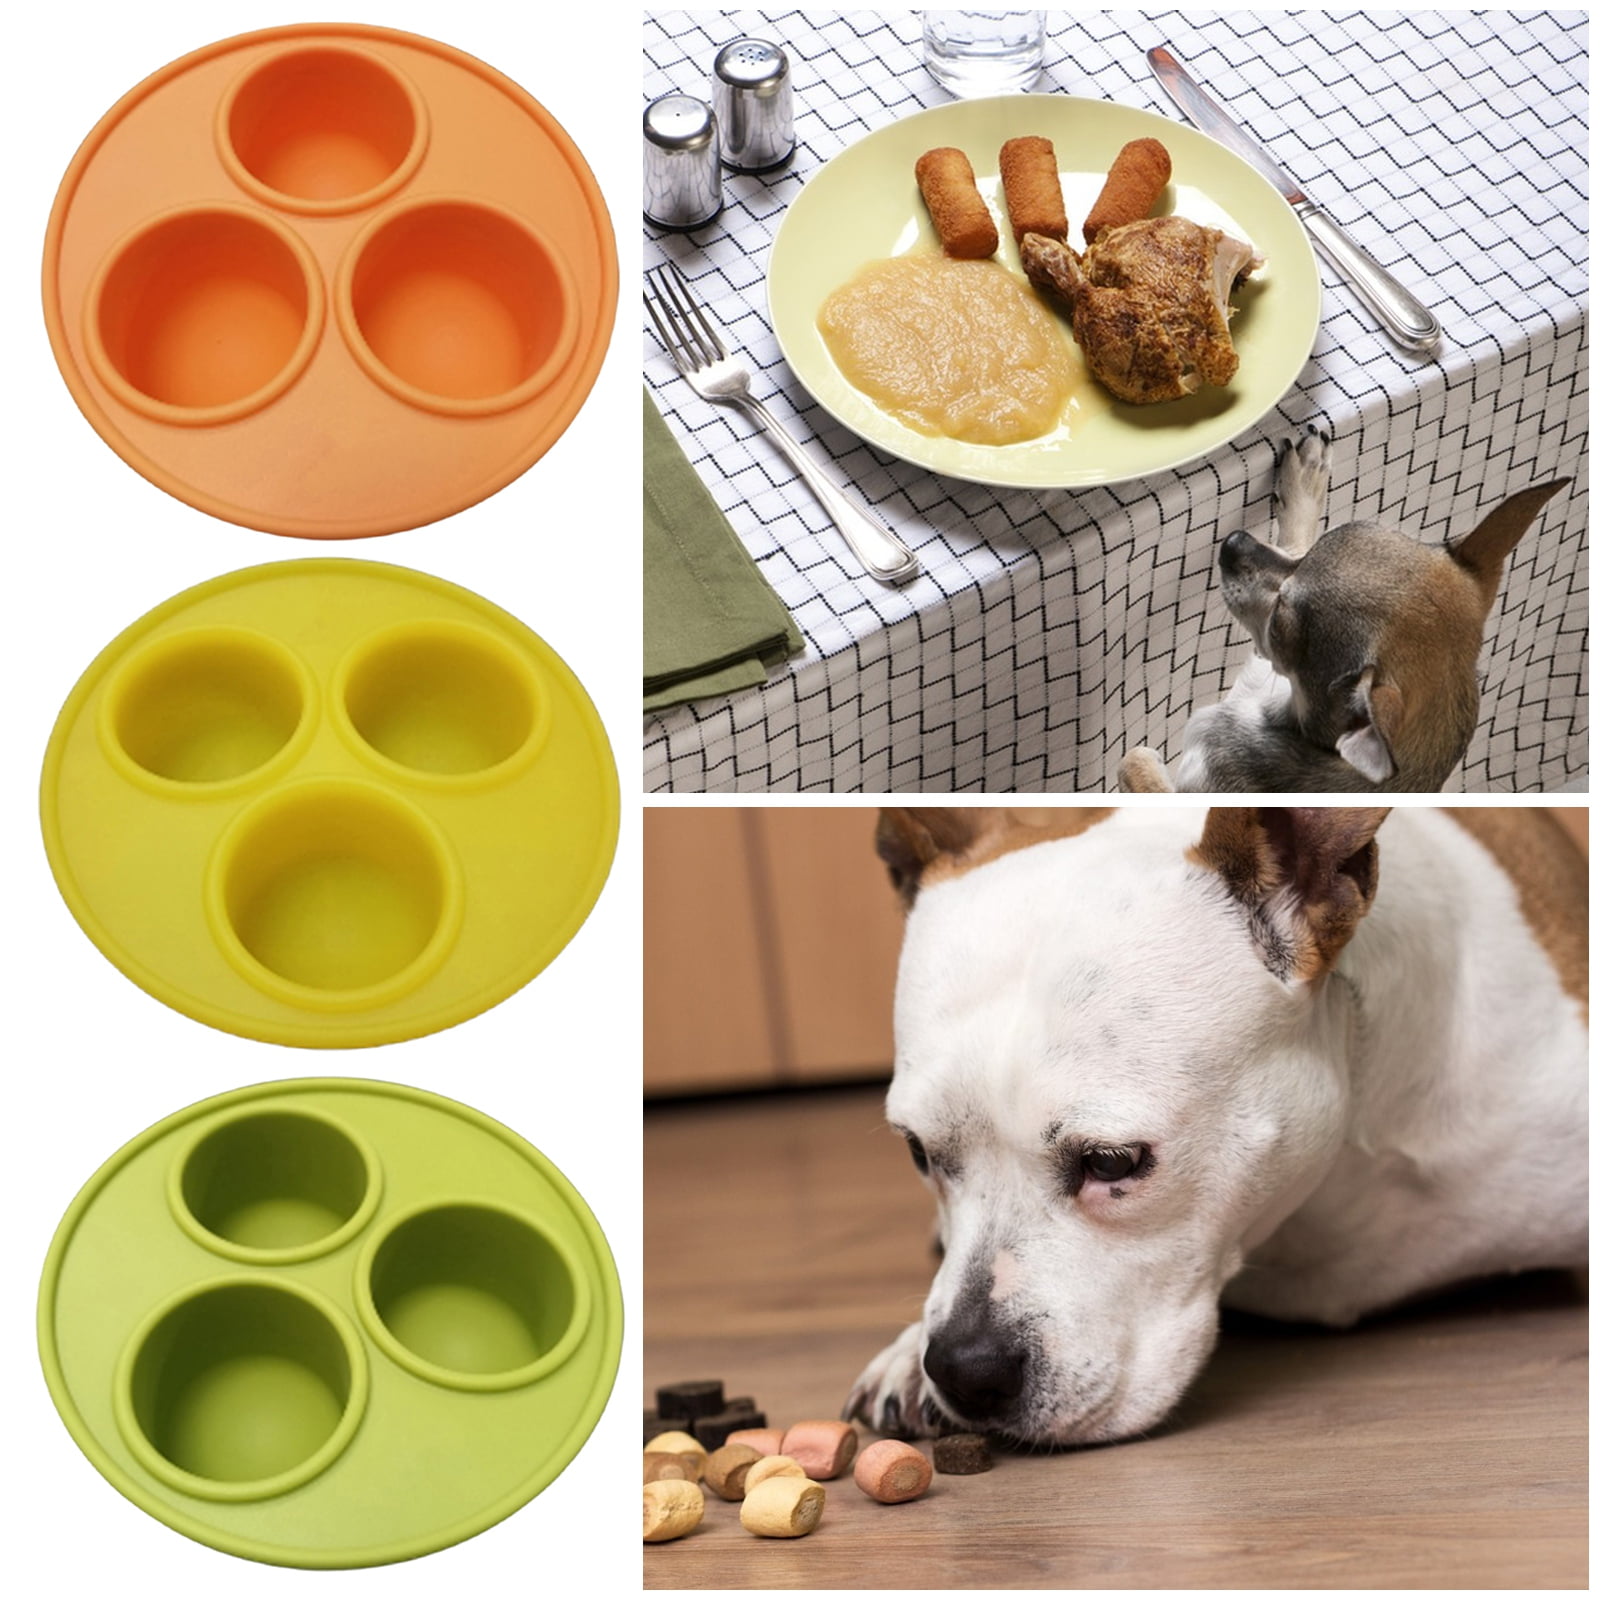  Dog Treat Molds - Paw and Bone Silicone Dog Treat Molds, Large  Sized, with Healthy Recipe Booklet, For Puppy Treats, Cookies, Chocolate,  Candy and Dog Ice Cubes, Food Grade Silicone Trays